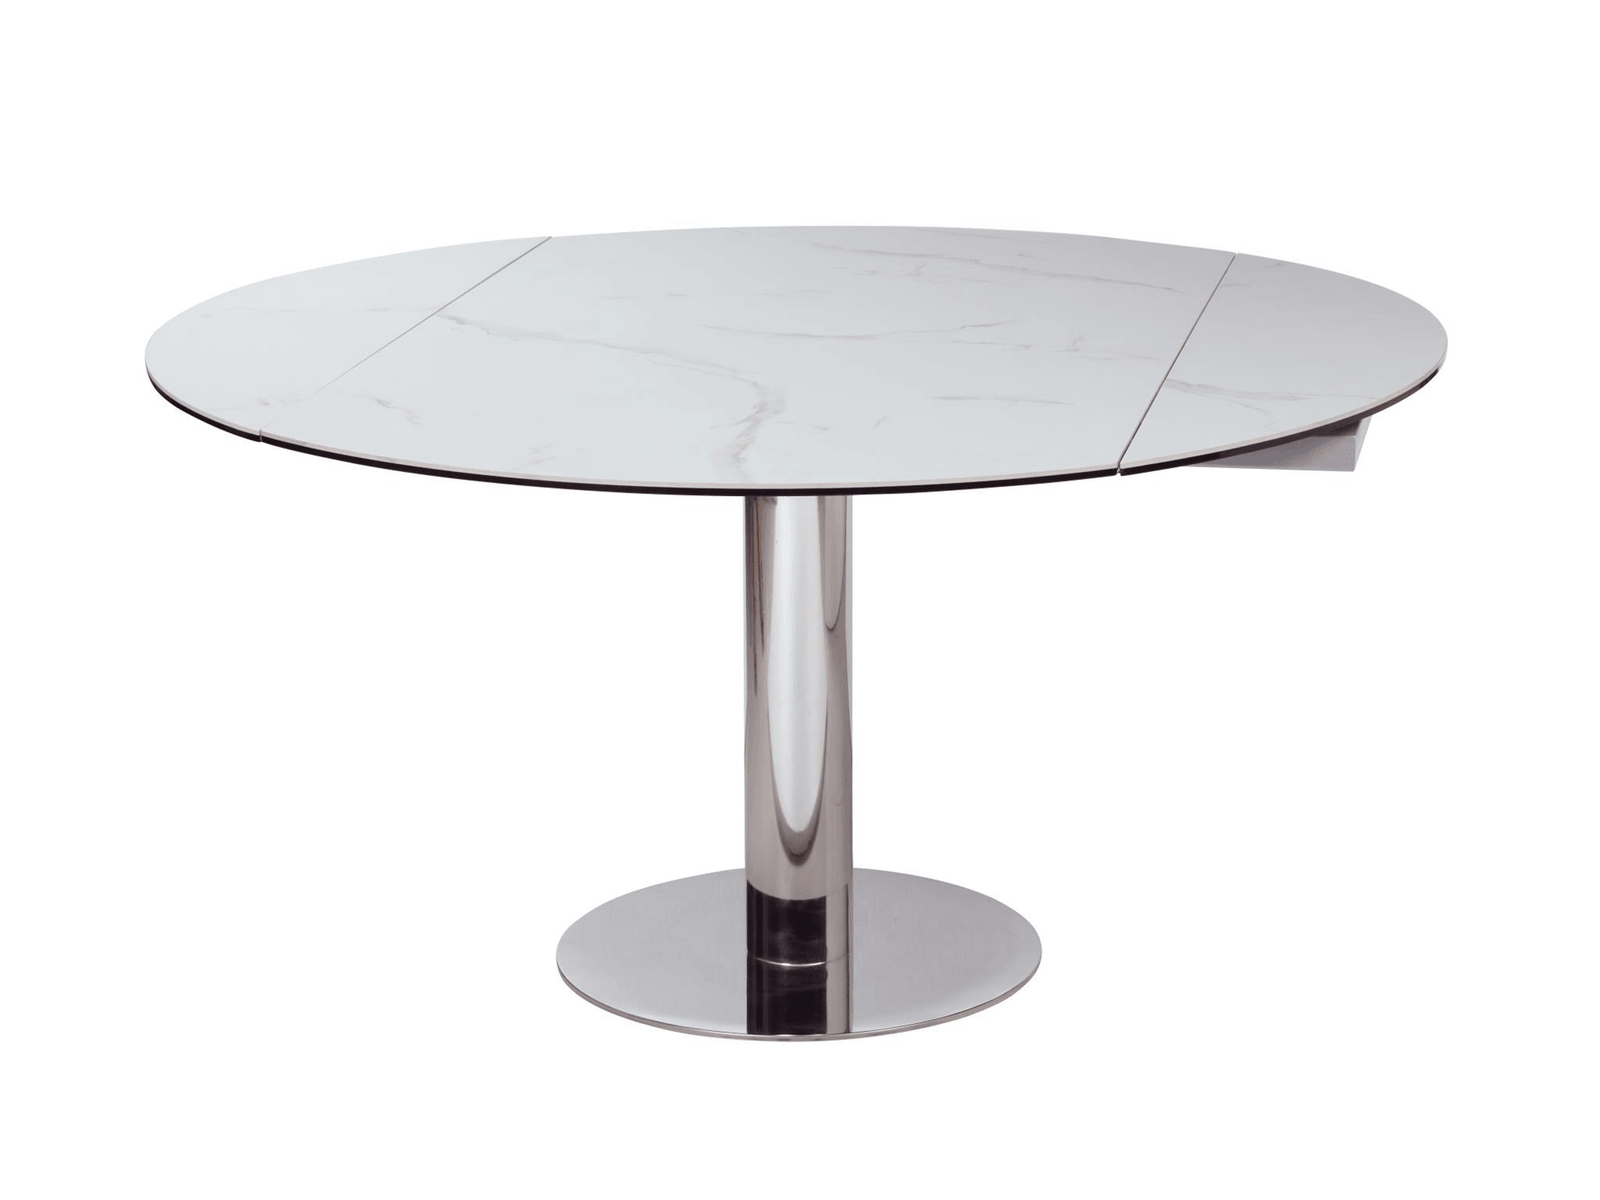 Lola 78 Oval Wood Top Dining Table in White - Euro Living Furniture